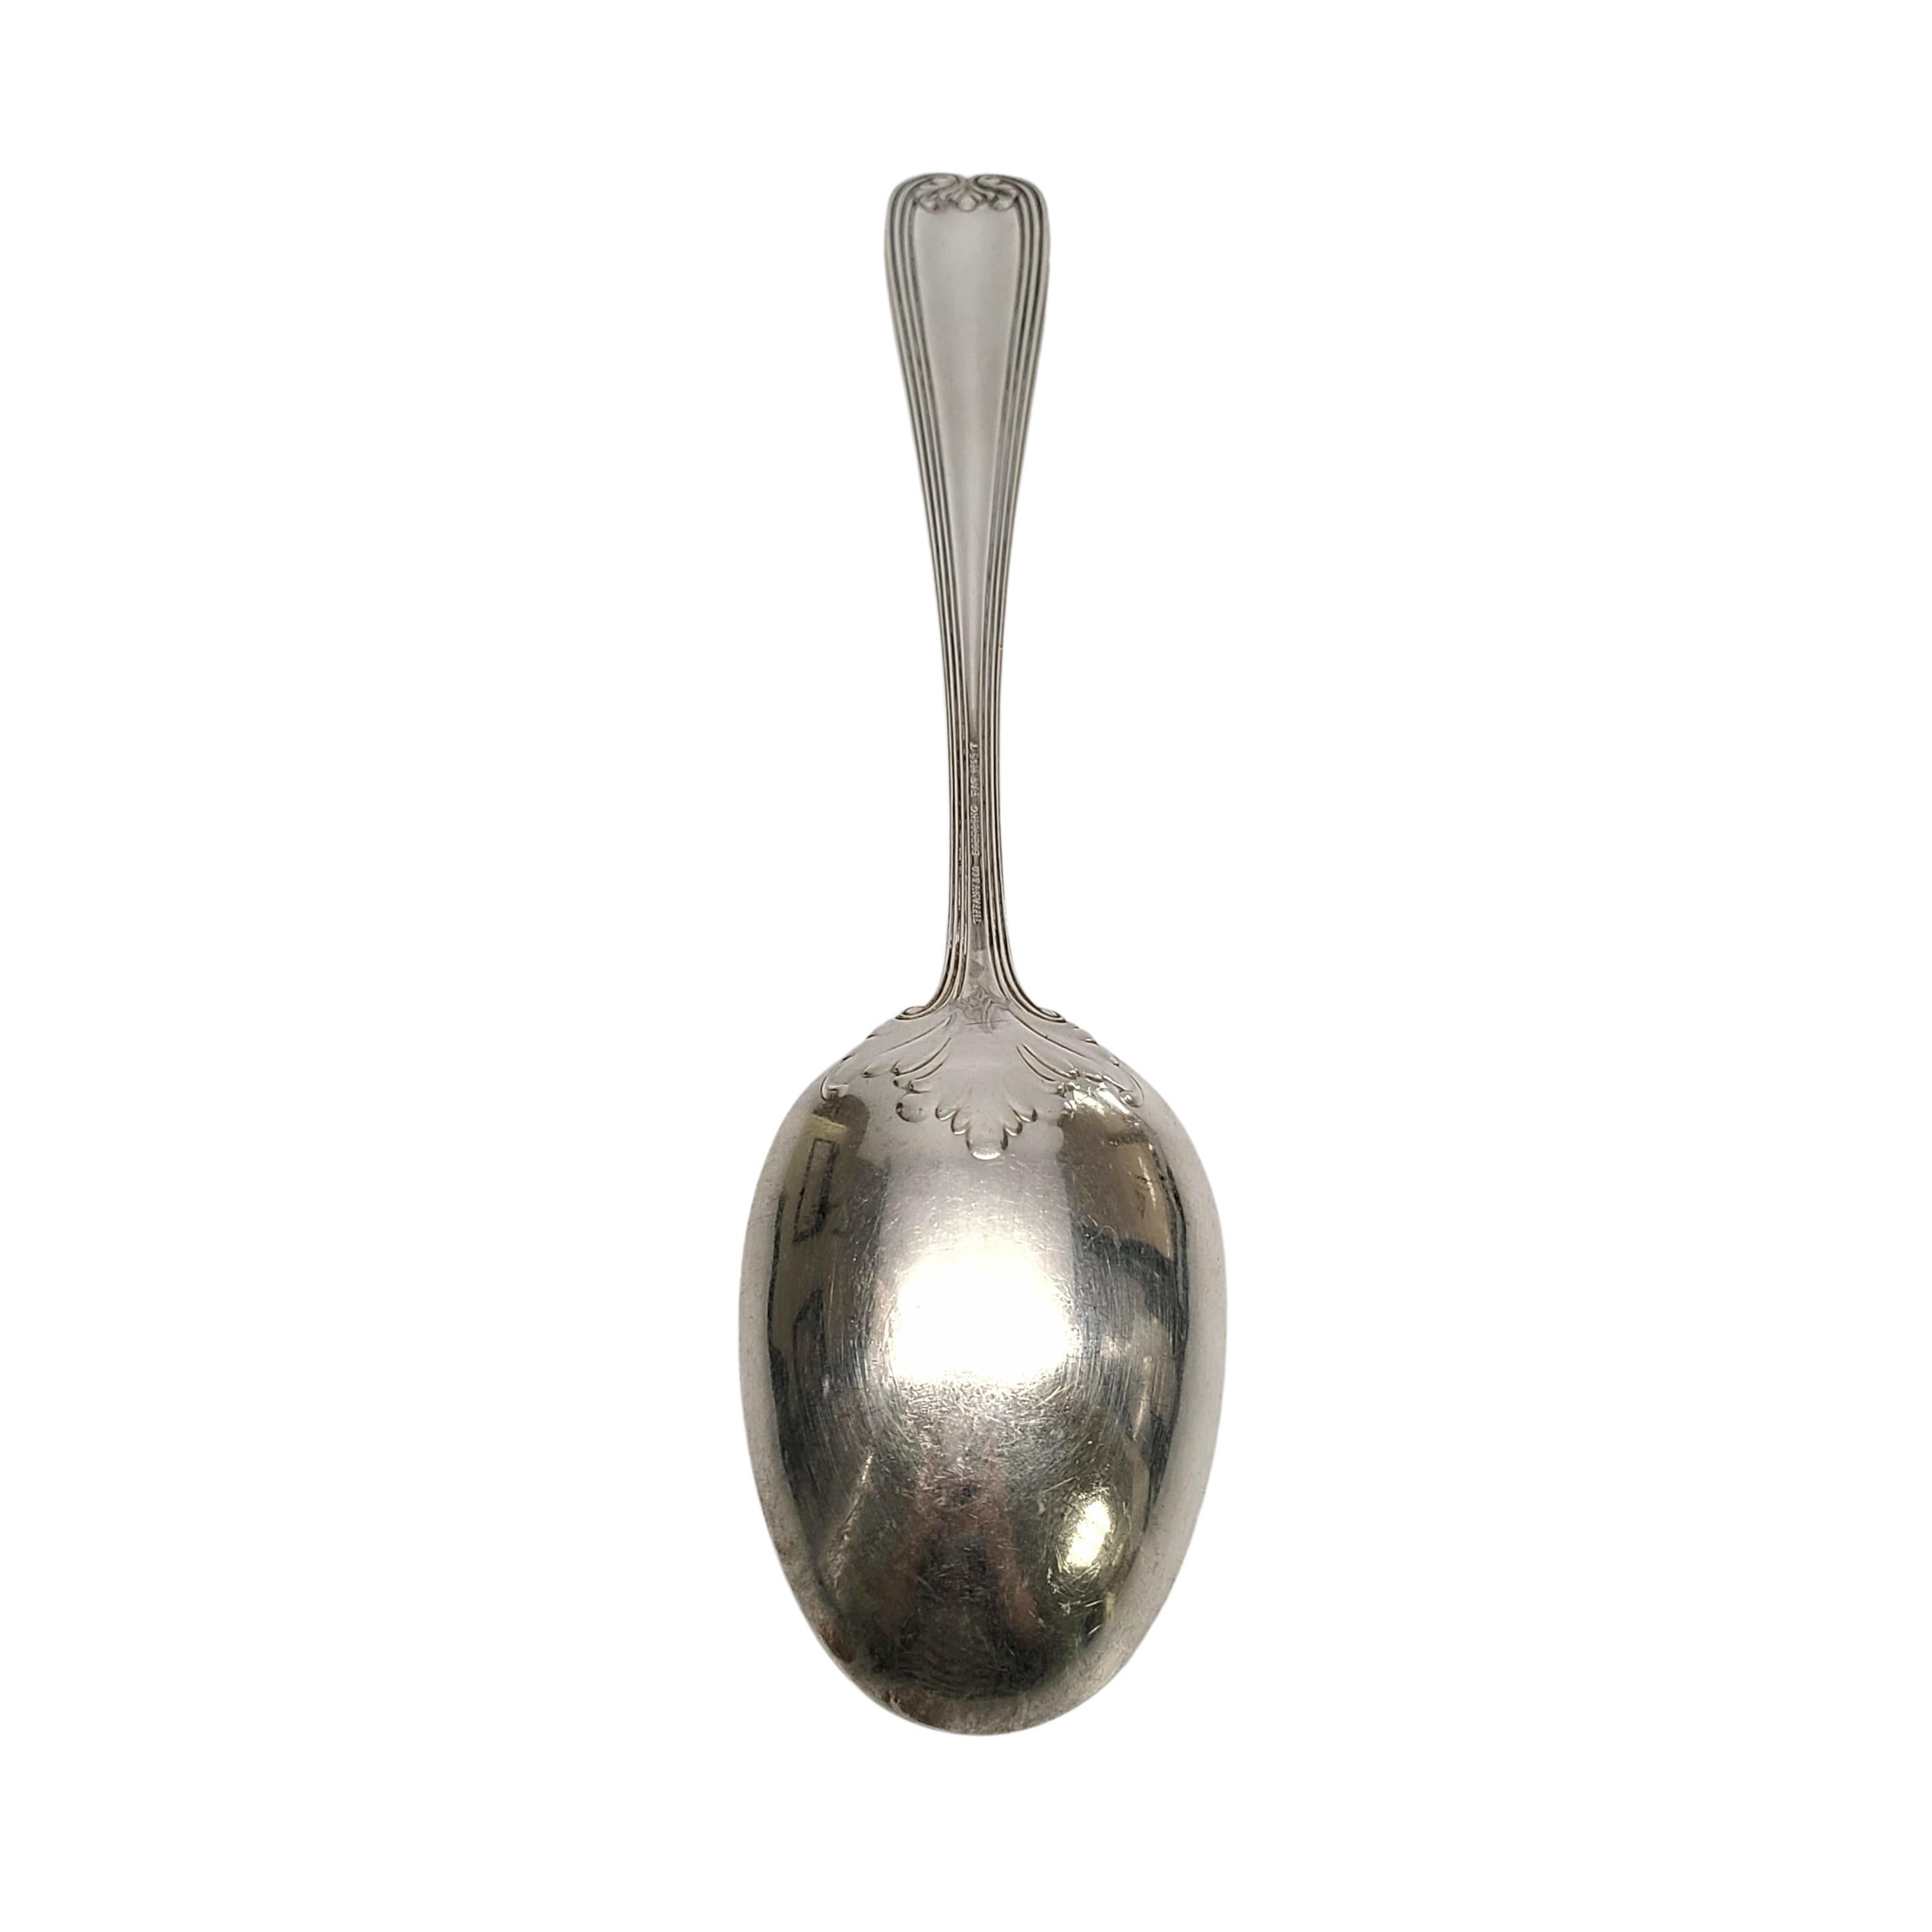 Sterling silver vegetable serving spoon by Tiffany & Co in the Colonial pattern.

Monogram appears to be McK

A large vegetable spoon in the Colonial pattern, designed by Paulding Farnham in 1895, features a simple scroll and leaf design on the